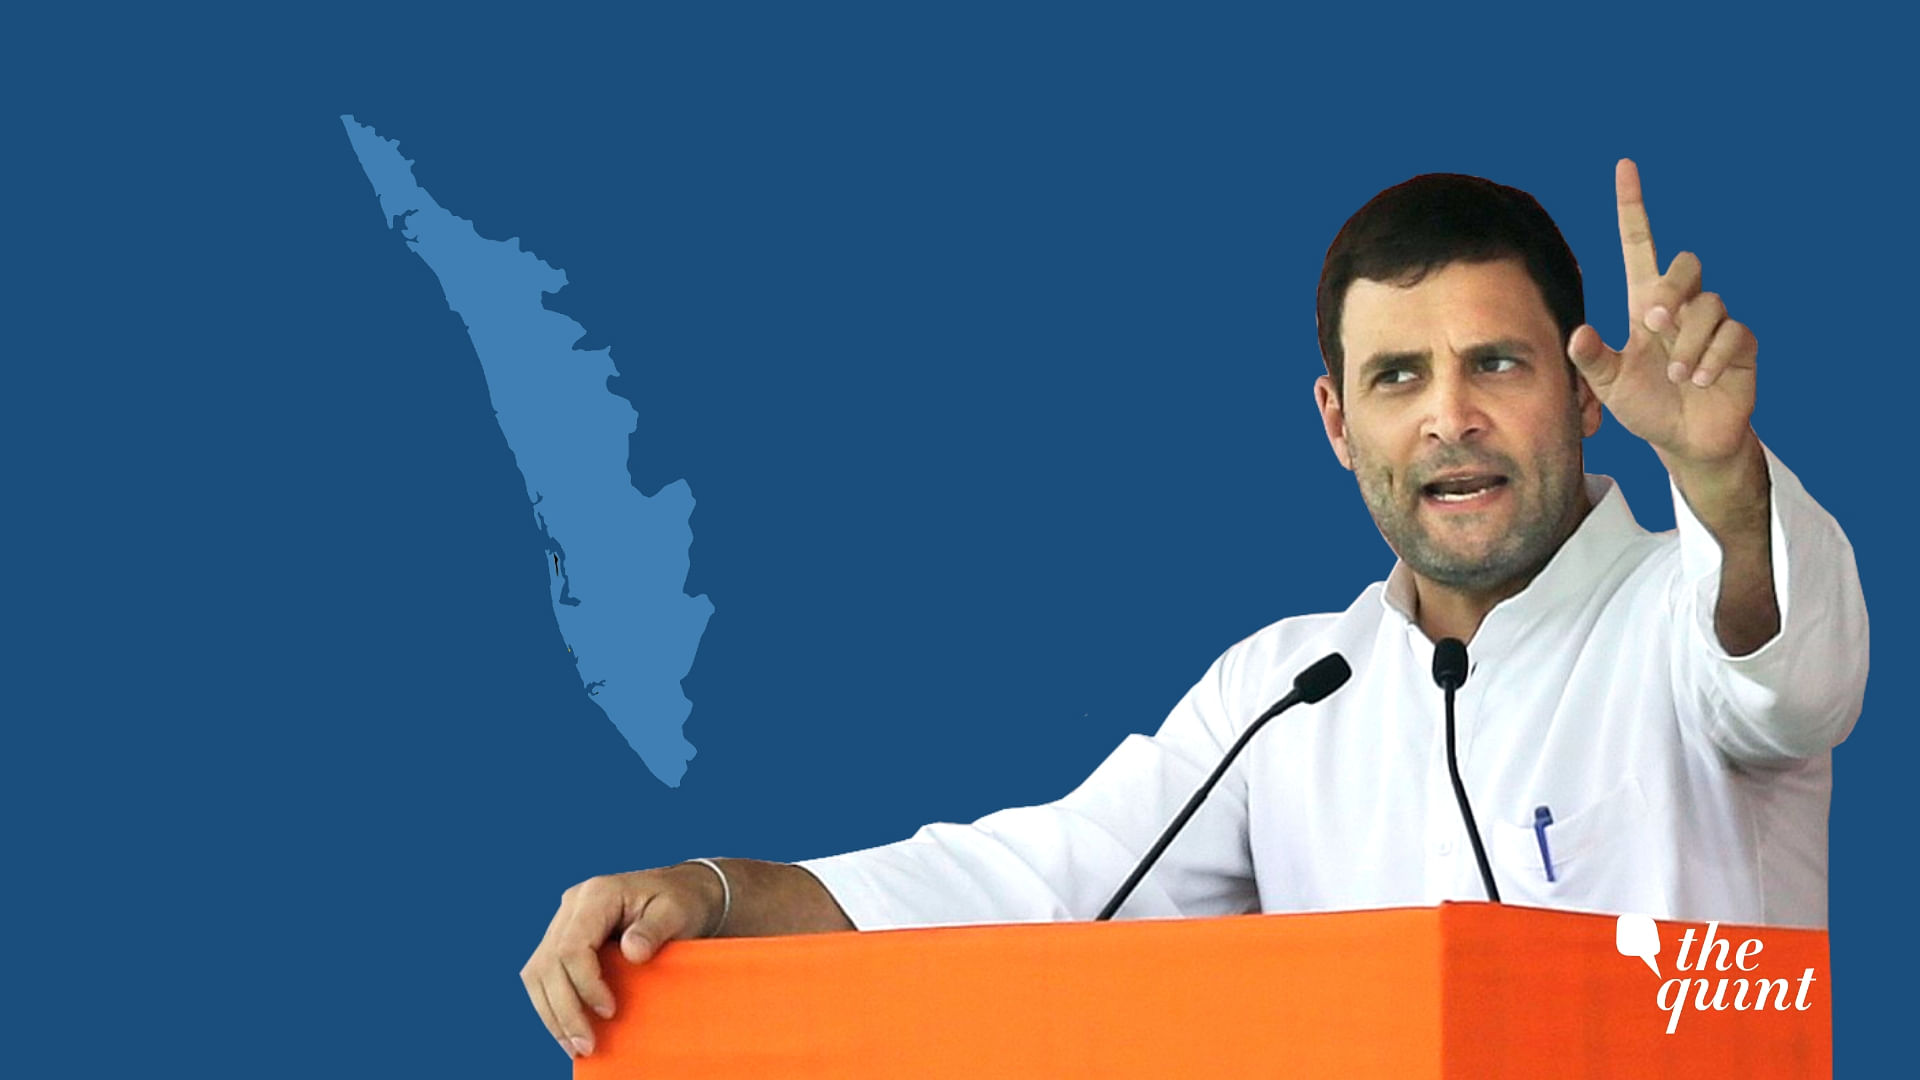 The Congress has decided that Rahul Gandhi will contest from one more seat - far away from Amethi - the safe seat of Wayanad in Kerala.